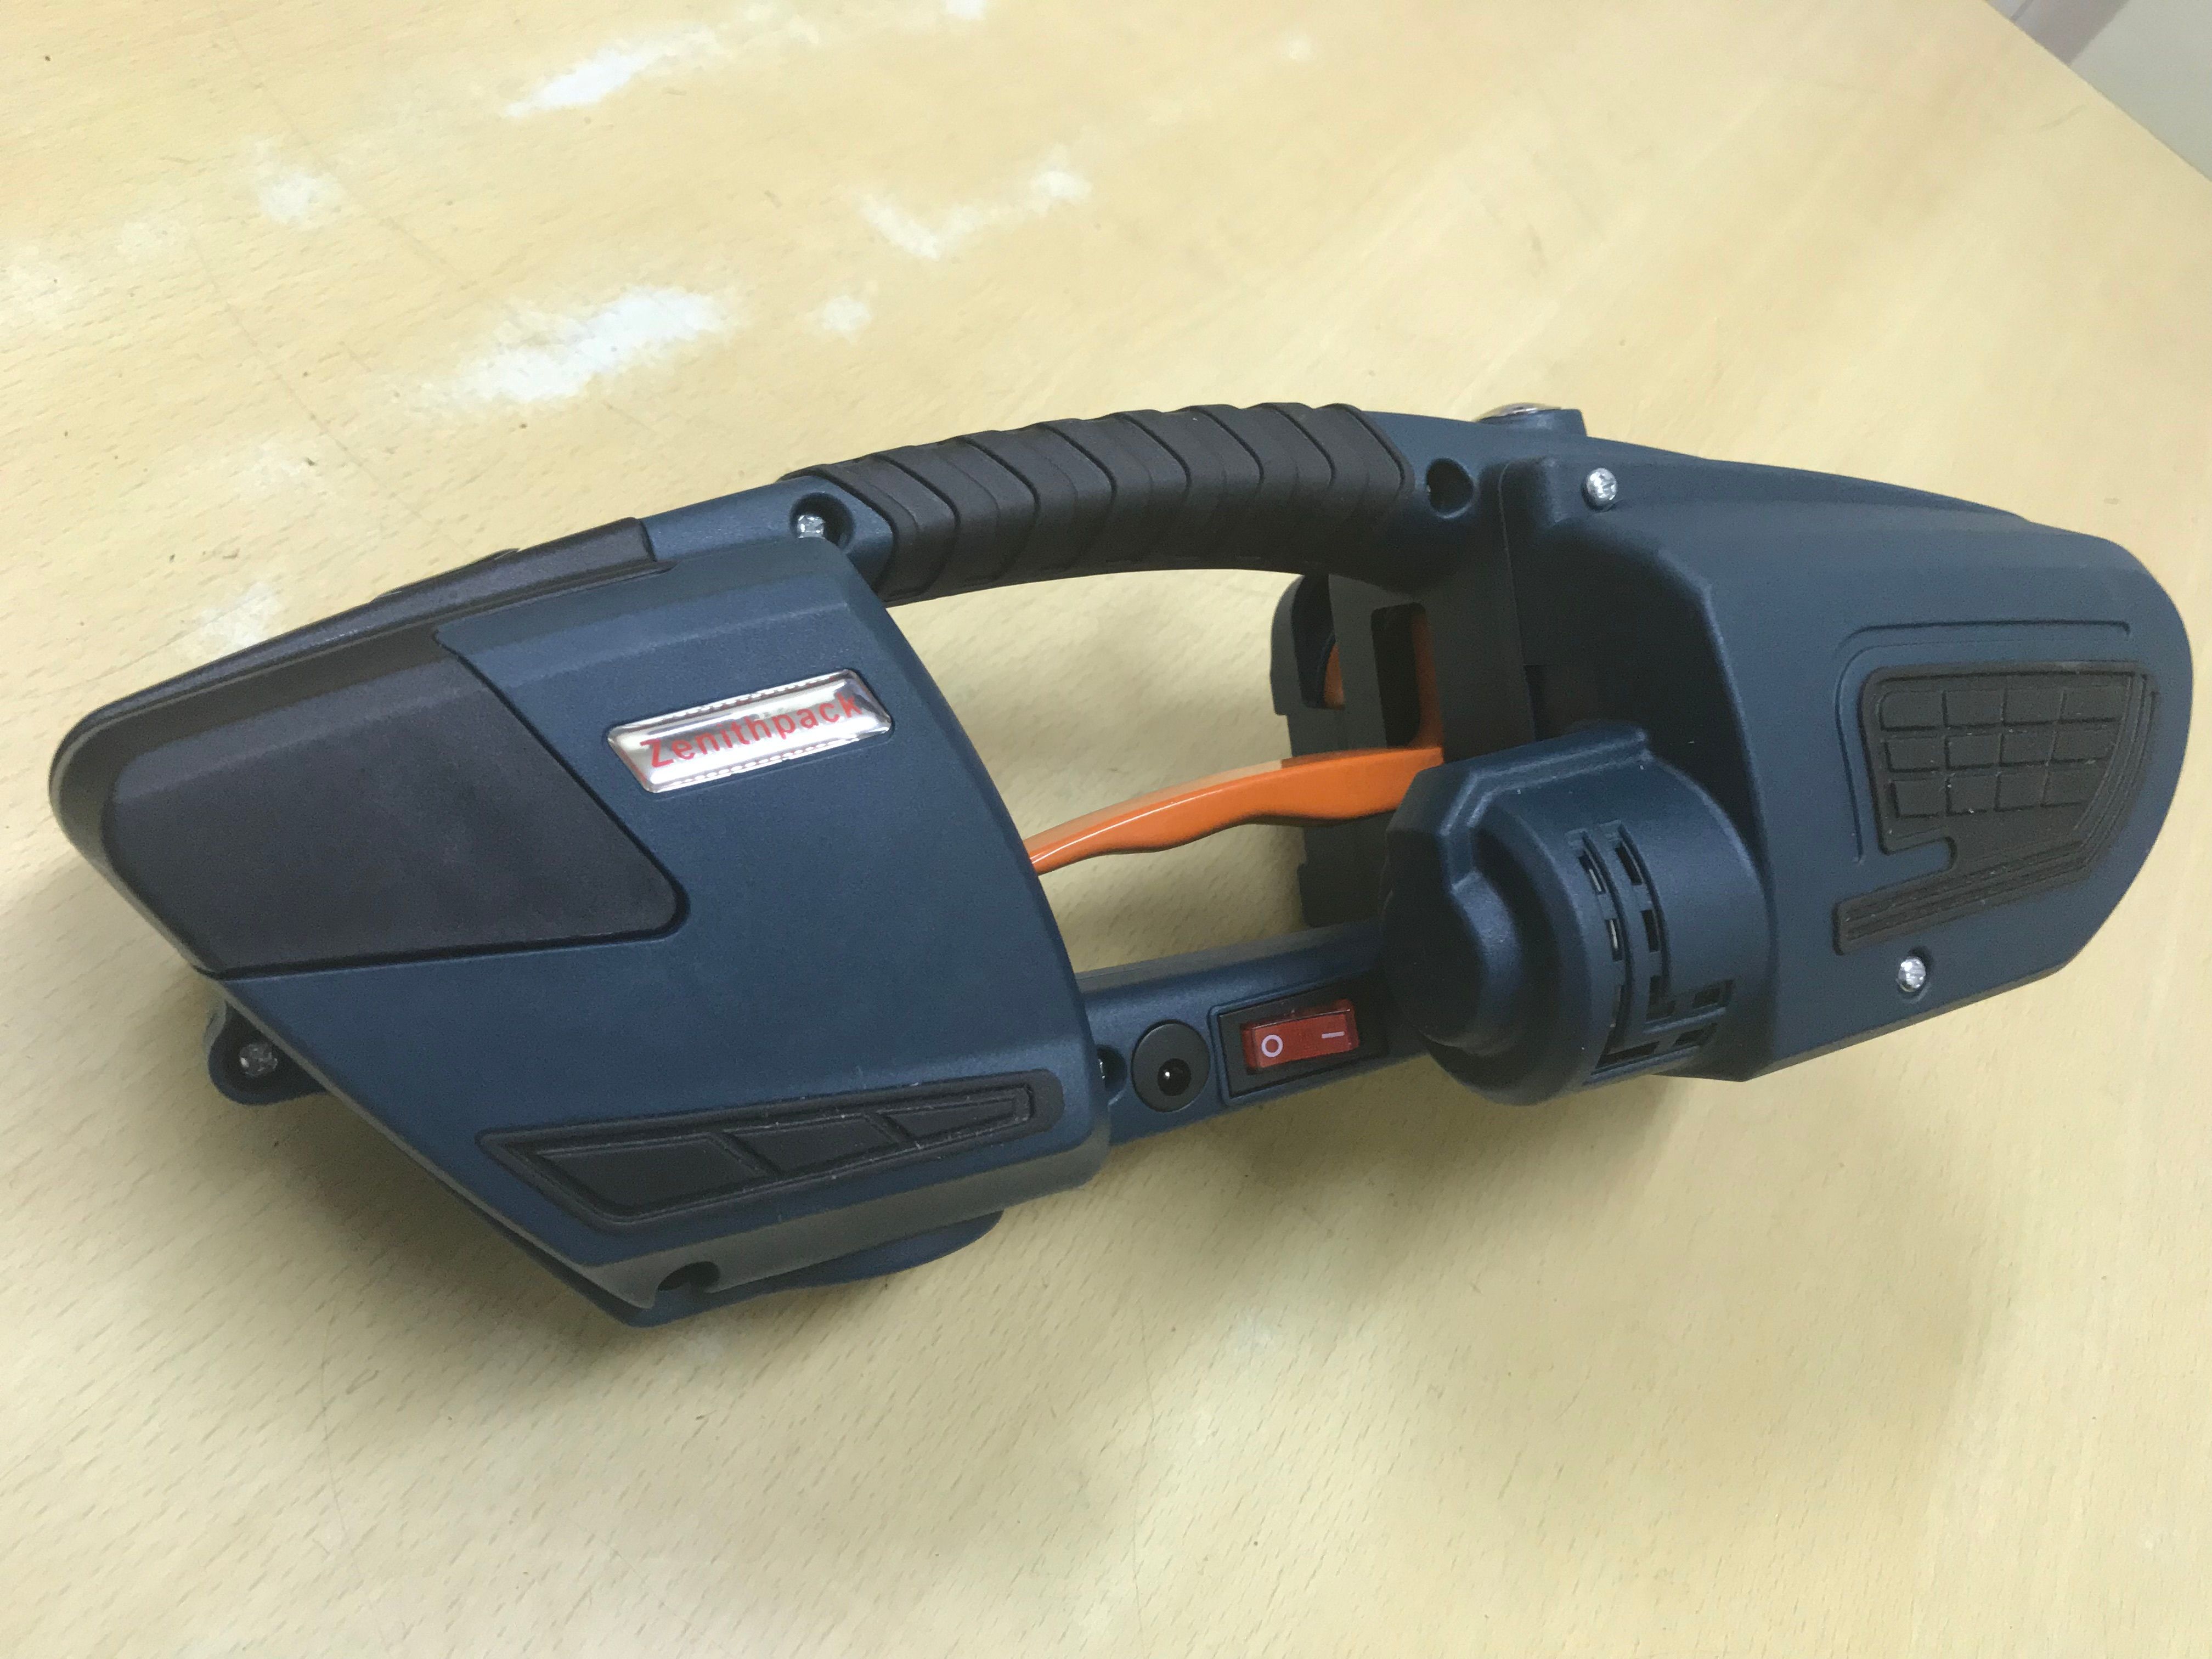 Battery Operated Strapping Tool